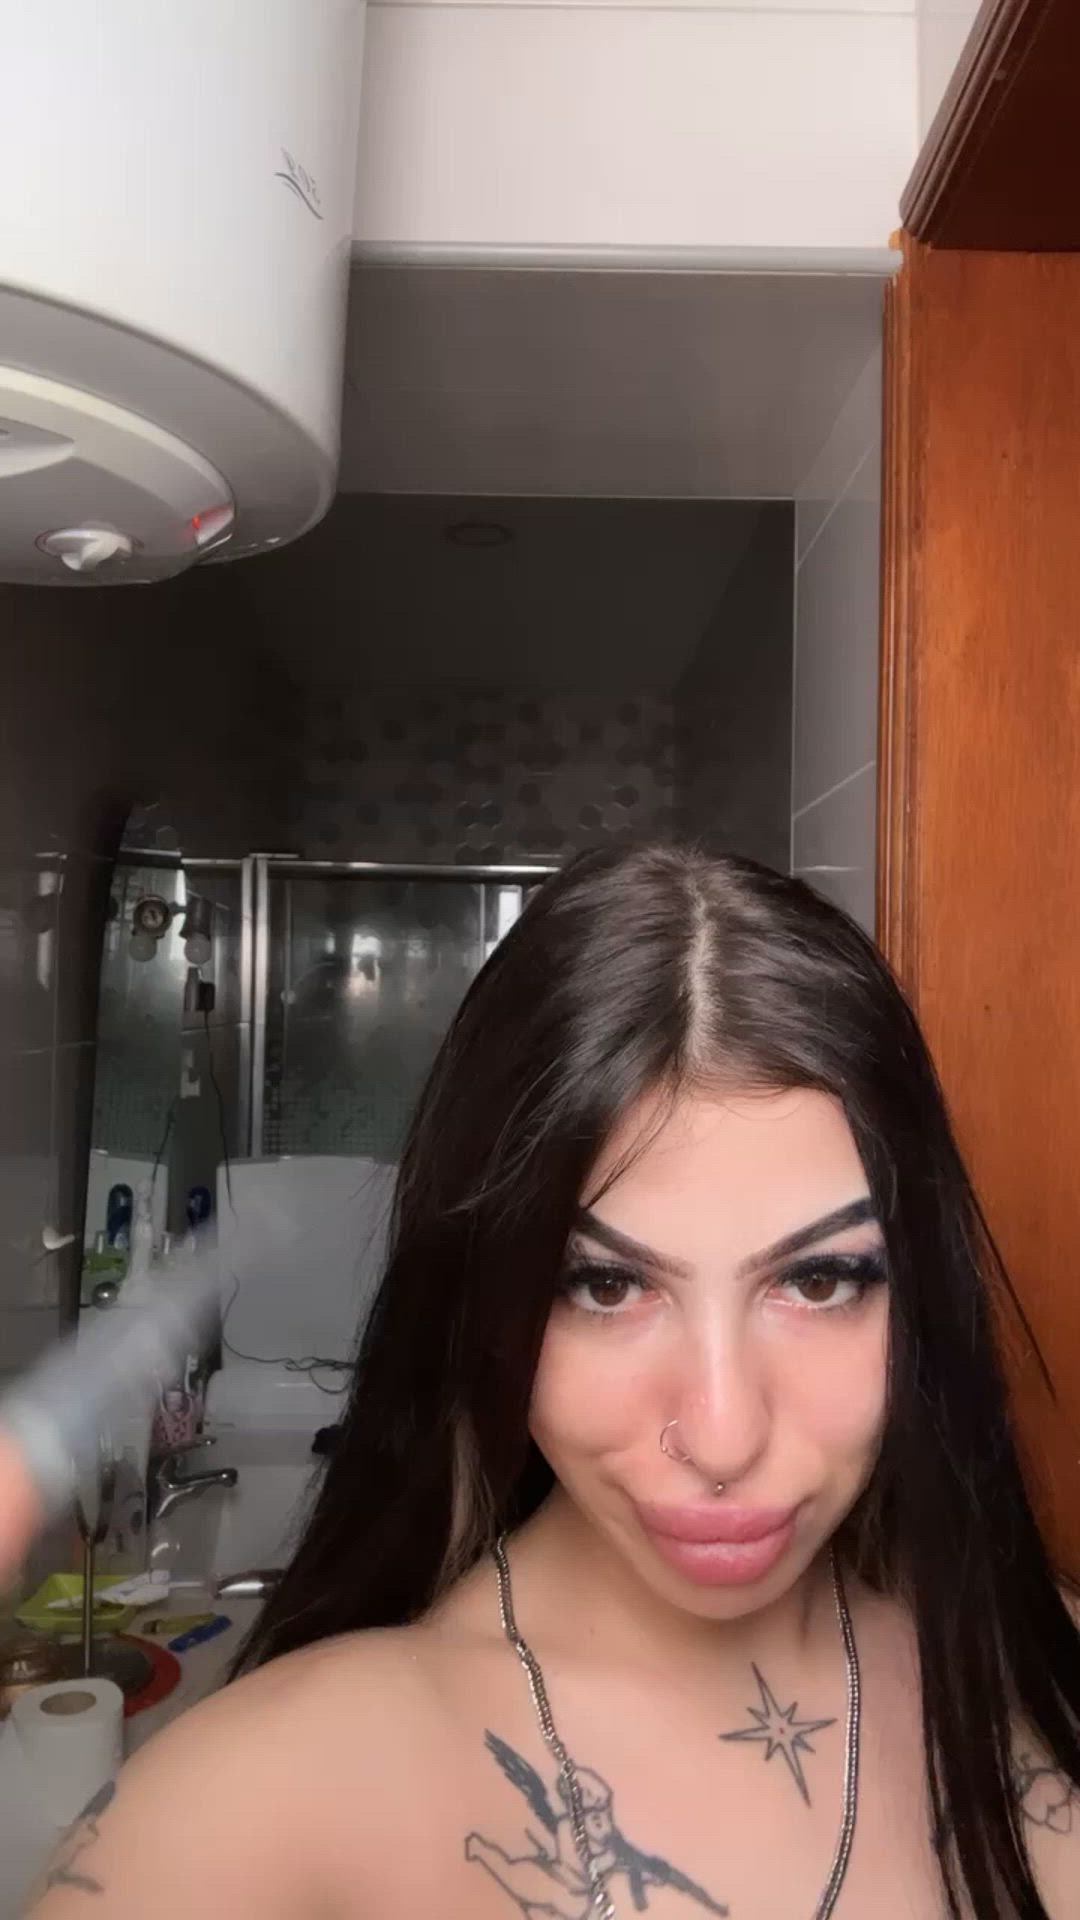 Boobs porn video with onlyfans model nostdio <strong>@whoiskittyy</strong>